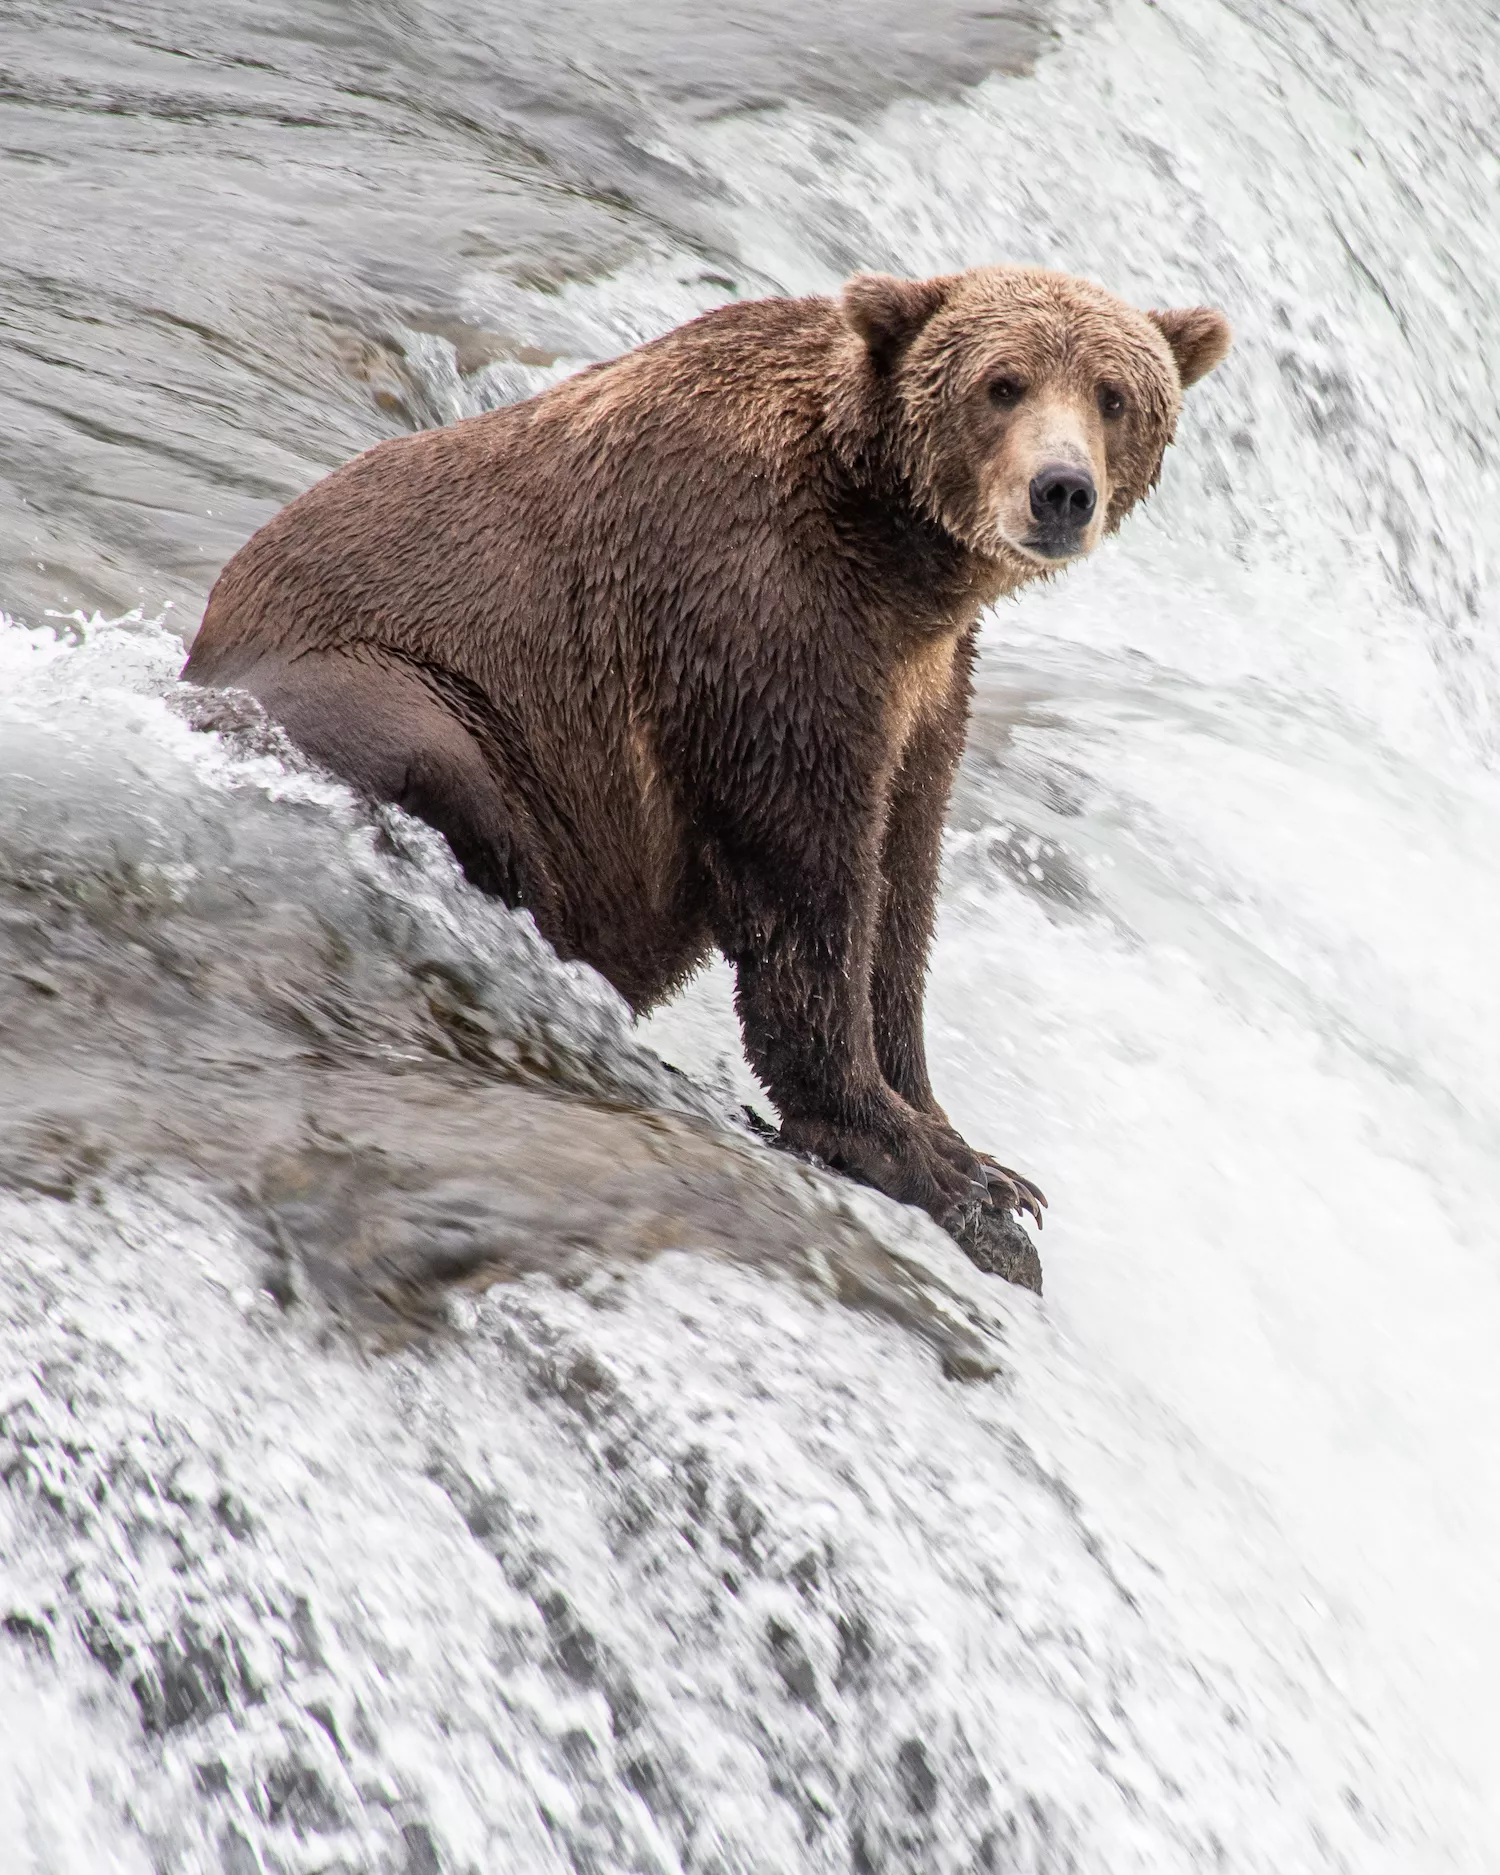 Bears wait by the falls